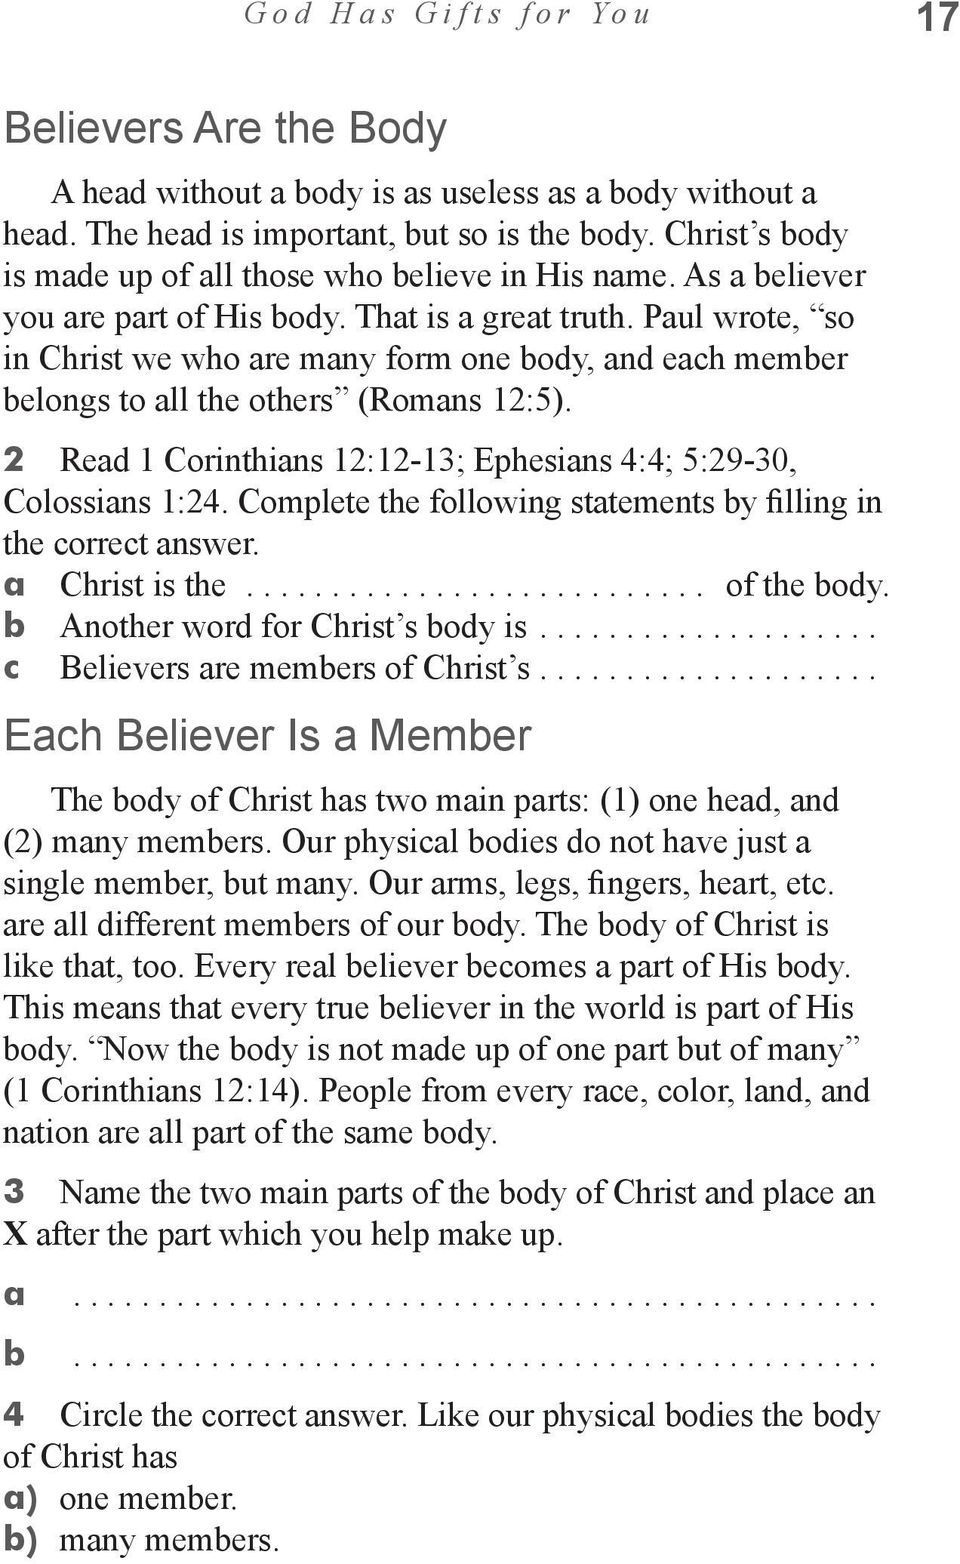 Paul wrote, so in Christ we who are many form one body, and each member belongs to all the others (Romans 12:5). 2 Read 1 Corinthians 12:12-13; Ephesians 4:4; 5:29-30, Colossians 1:24.